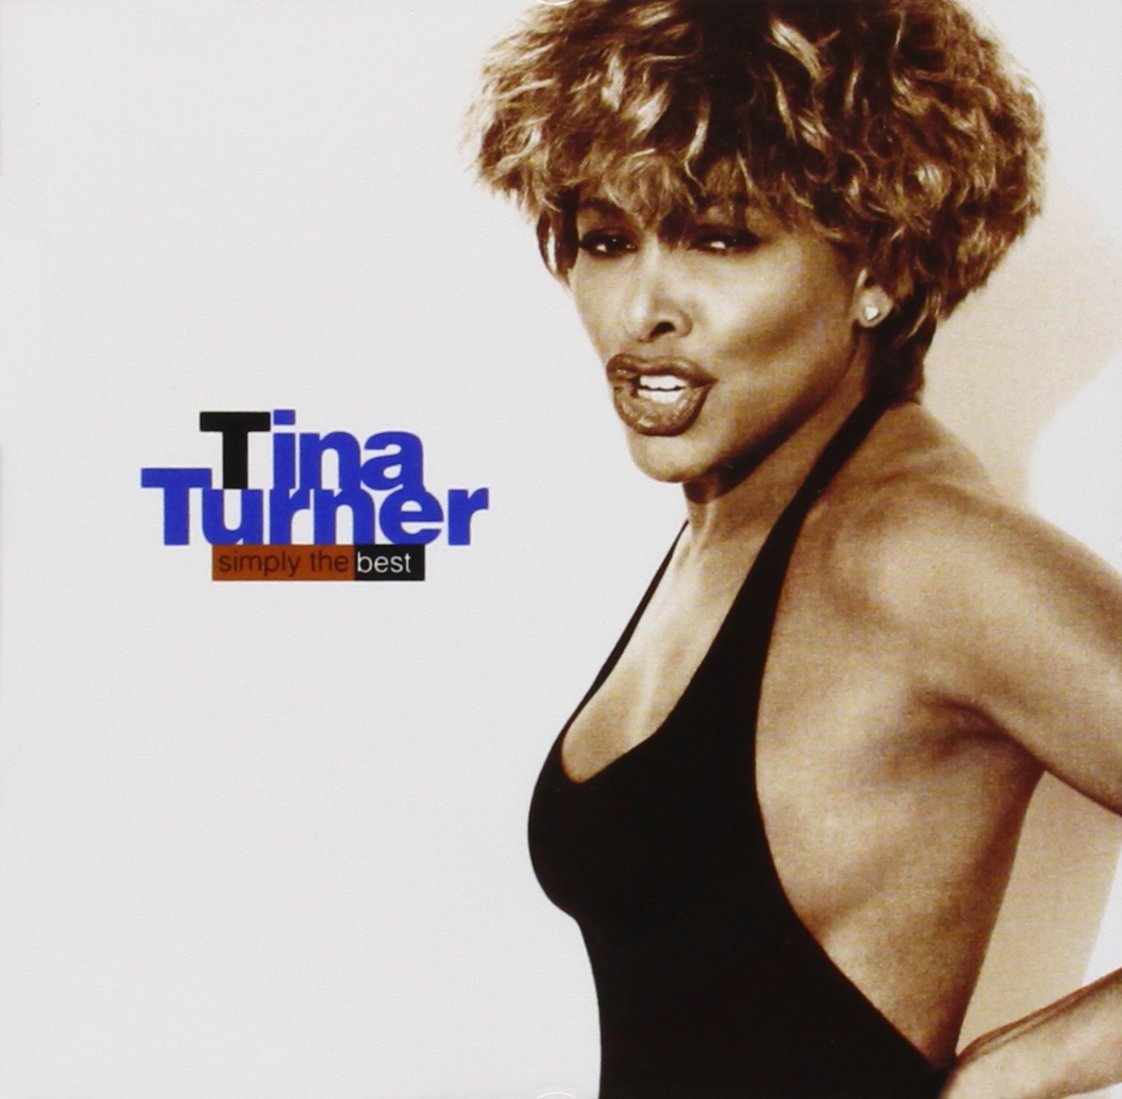 Simply The Best | Tina Turner